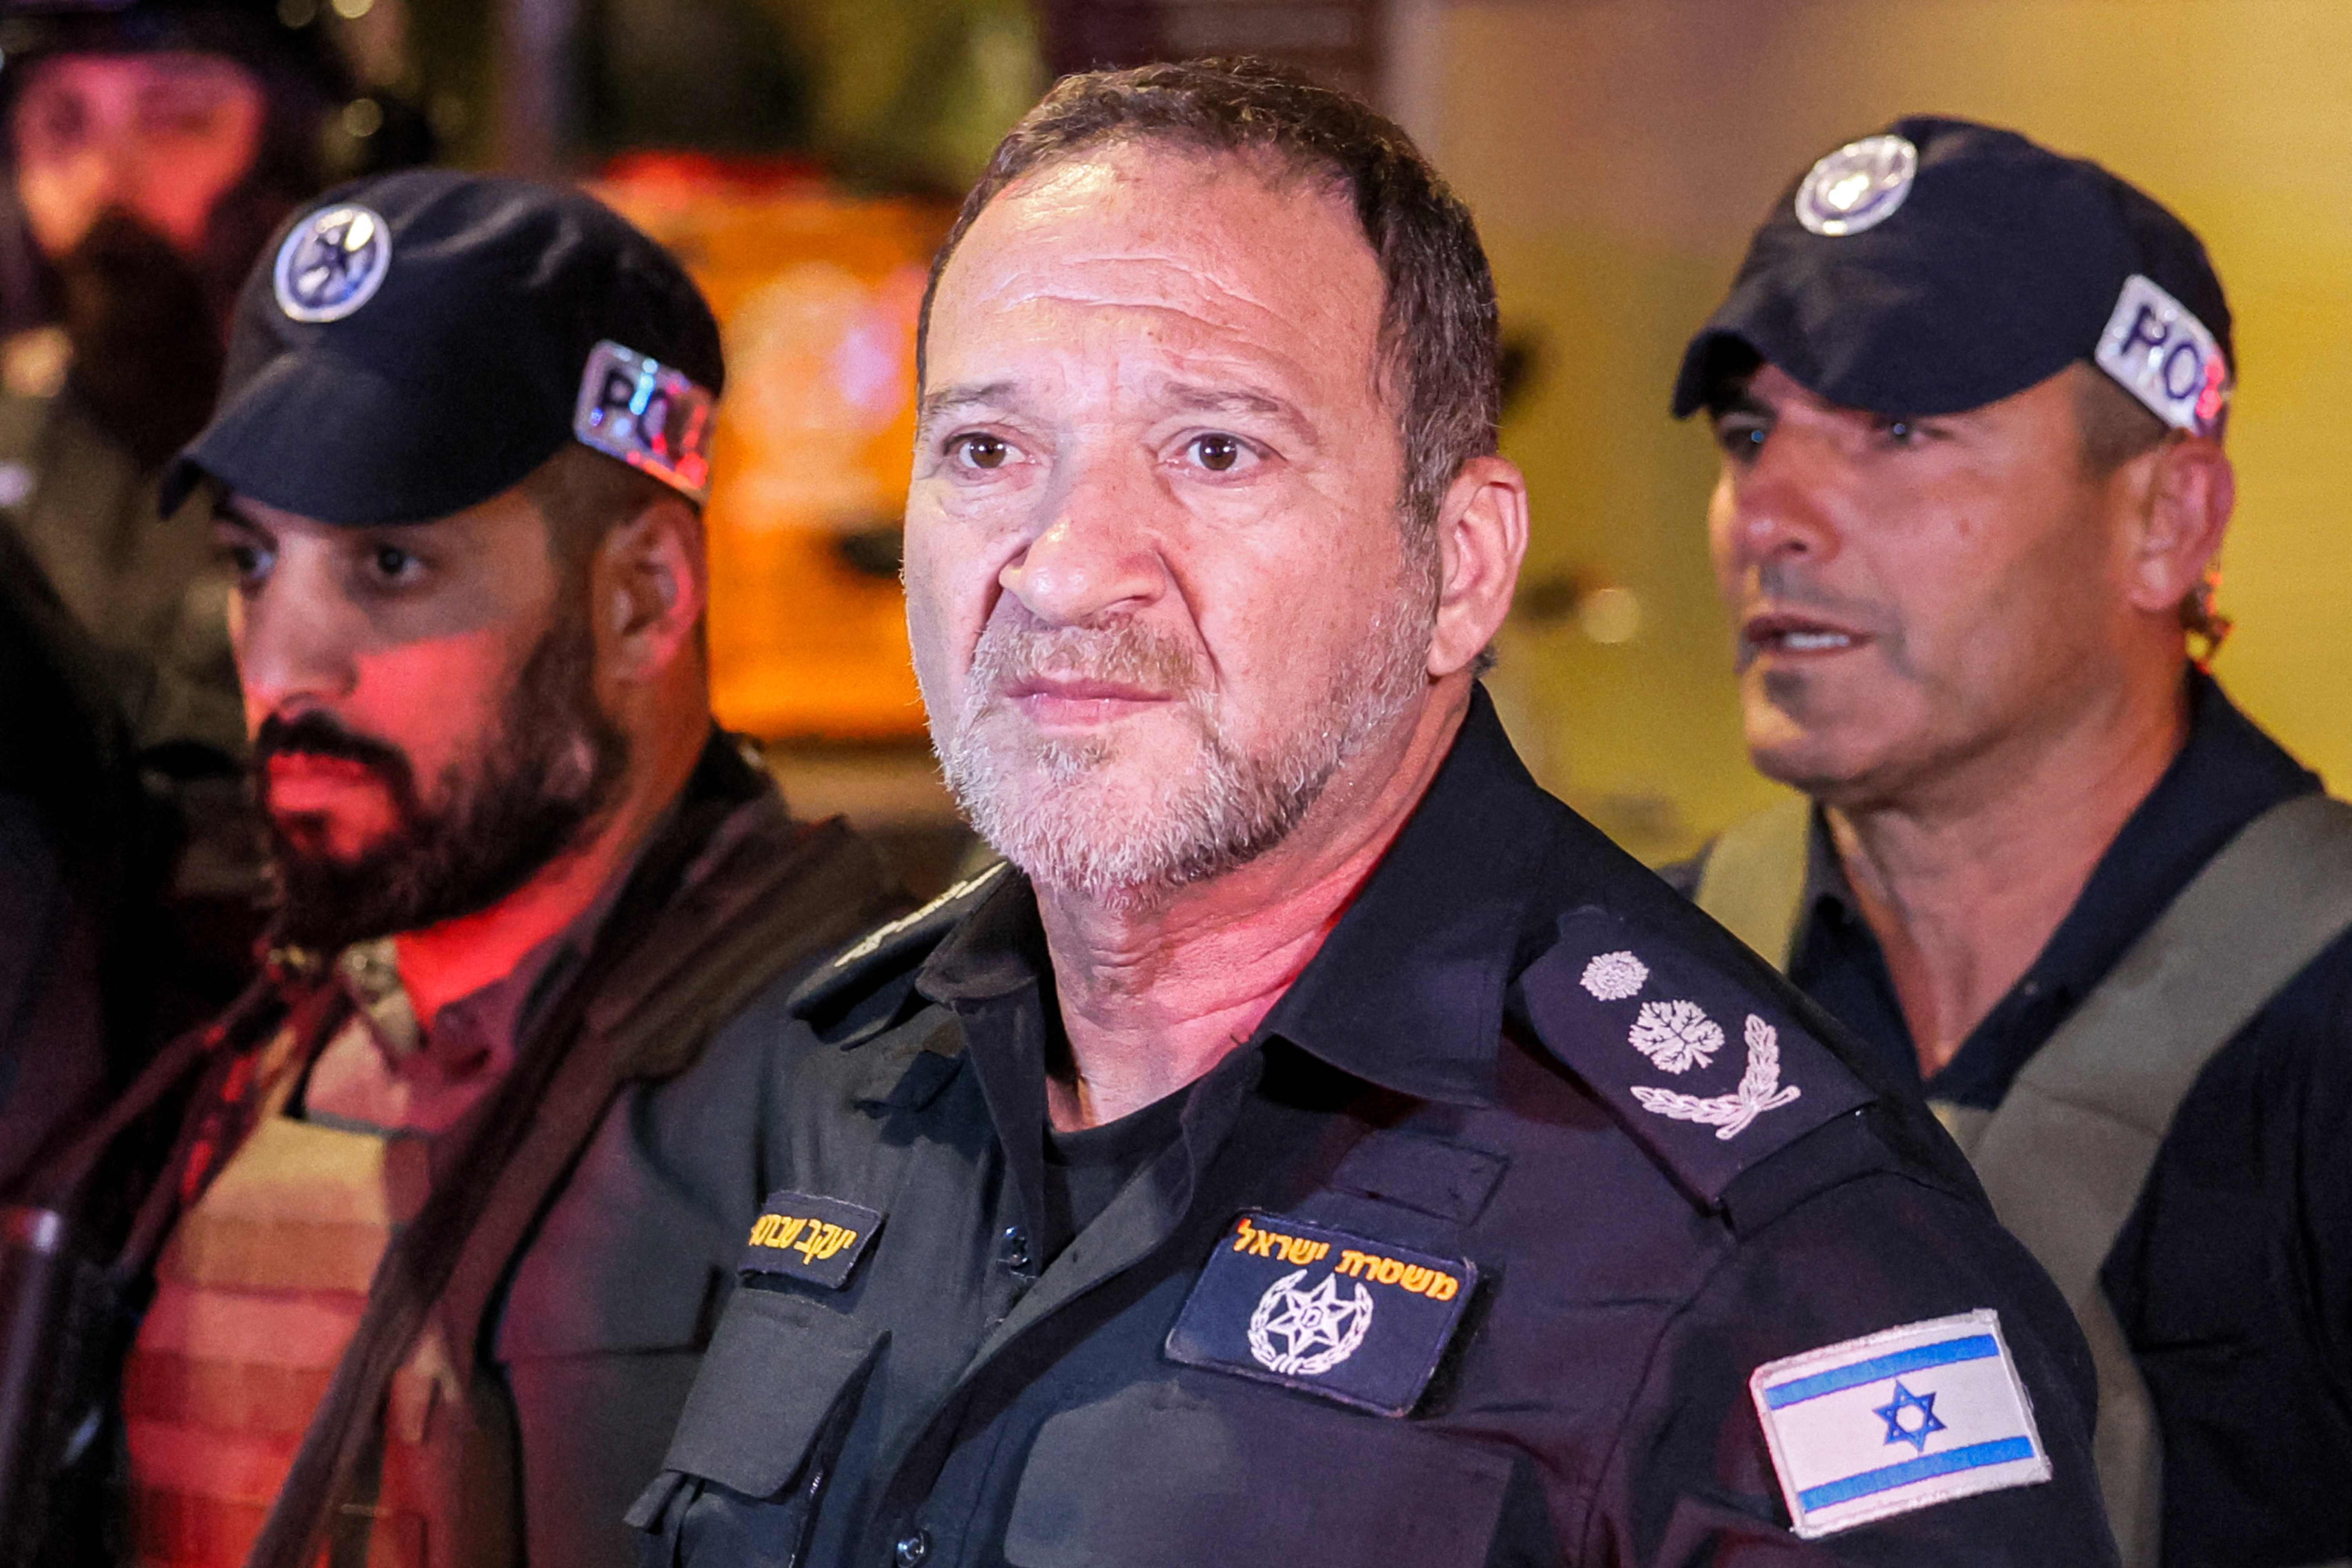 Israel’s Police Commissioner Kobi Shabtai is under fire for his leaked comments saying Arabs have muderous nature